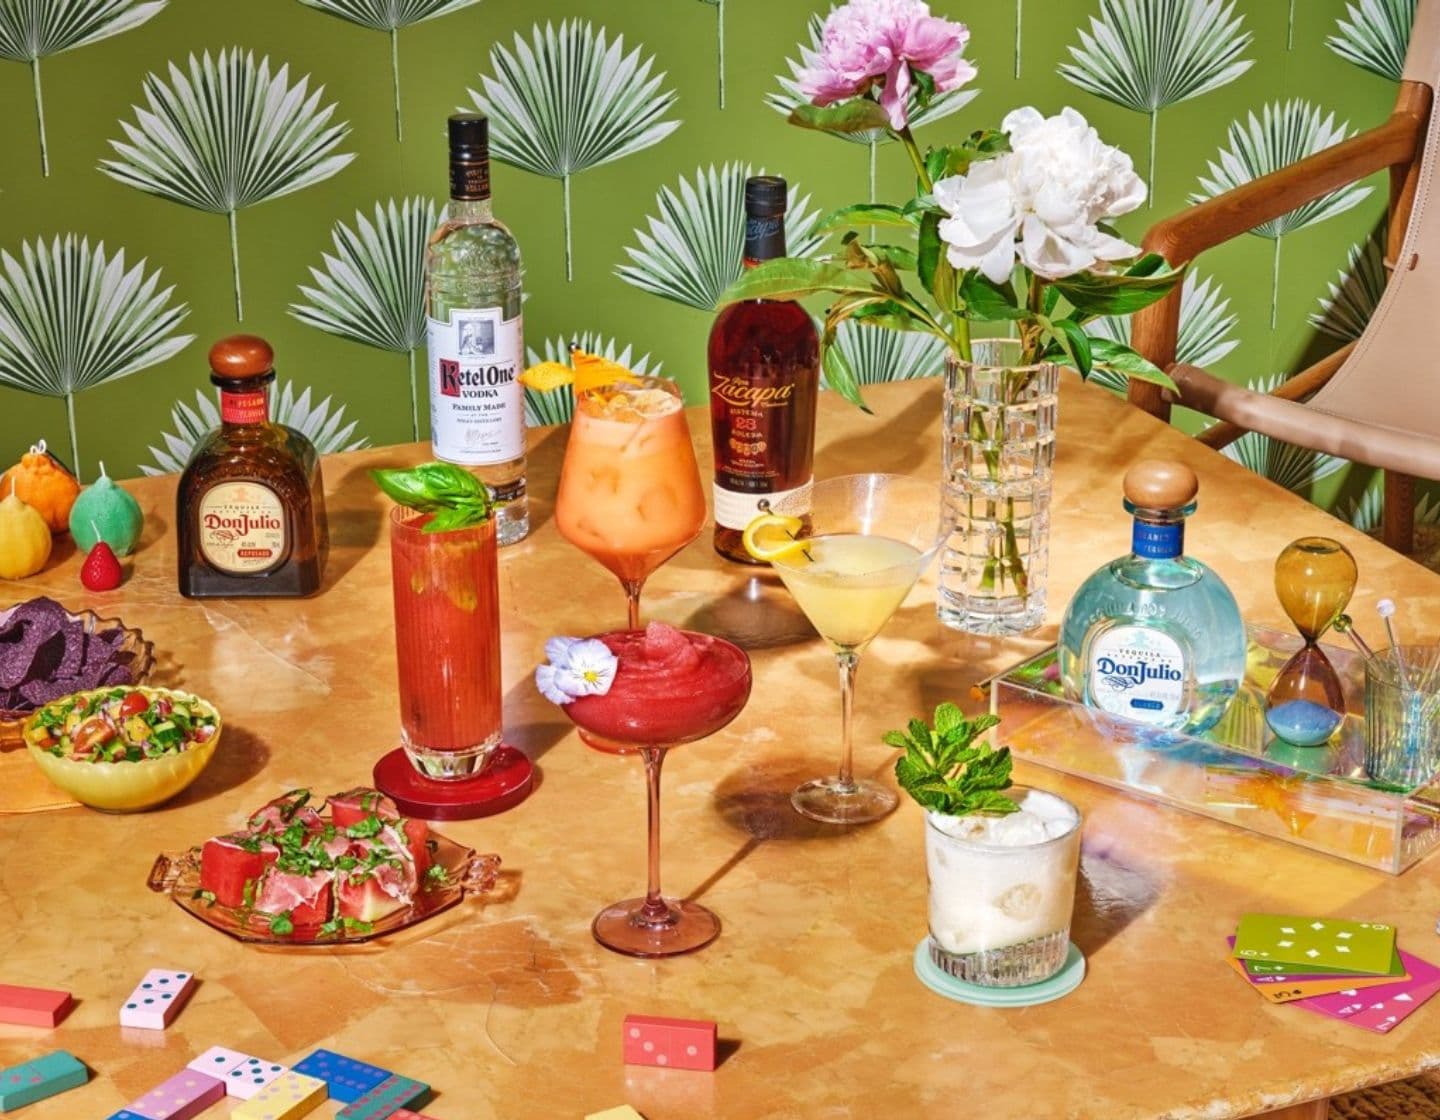 Assortment of colourful cocktails and spirit bottles.